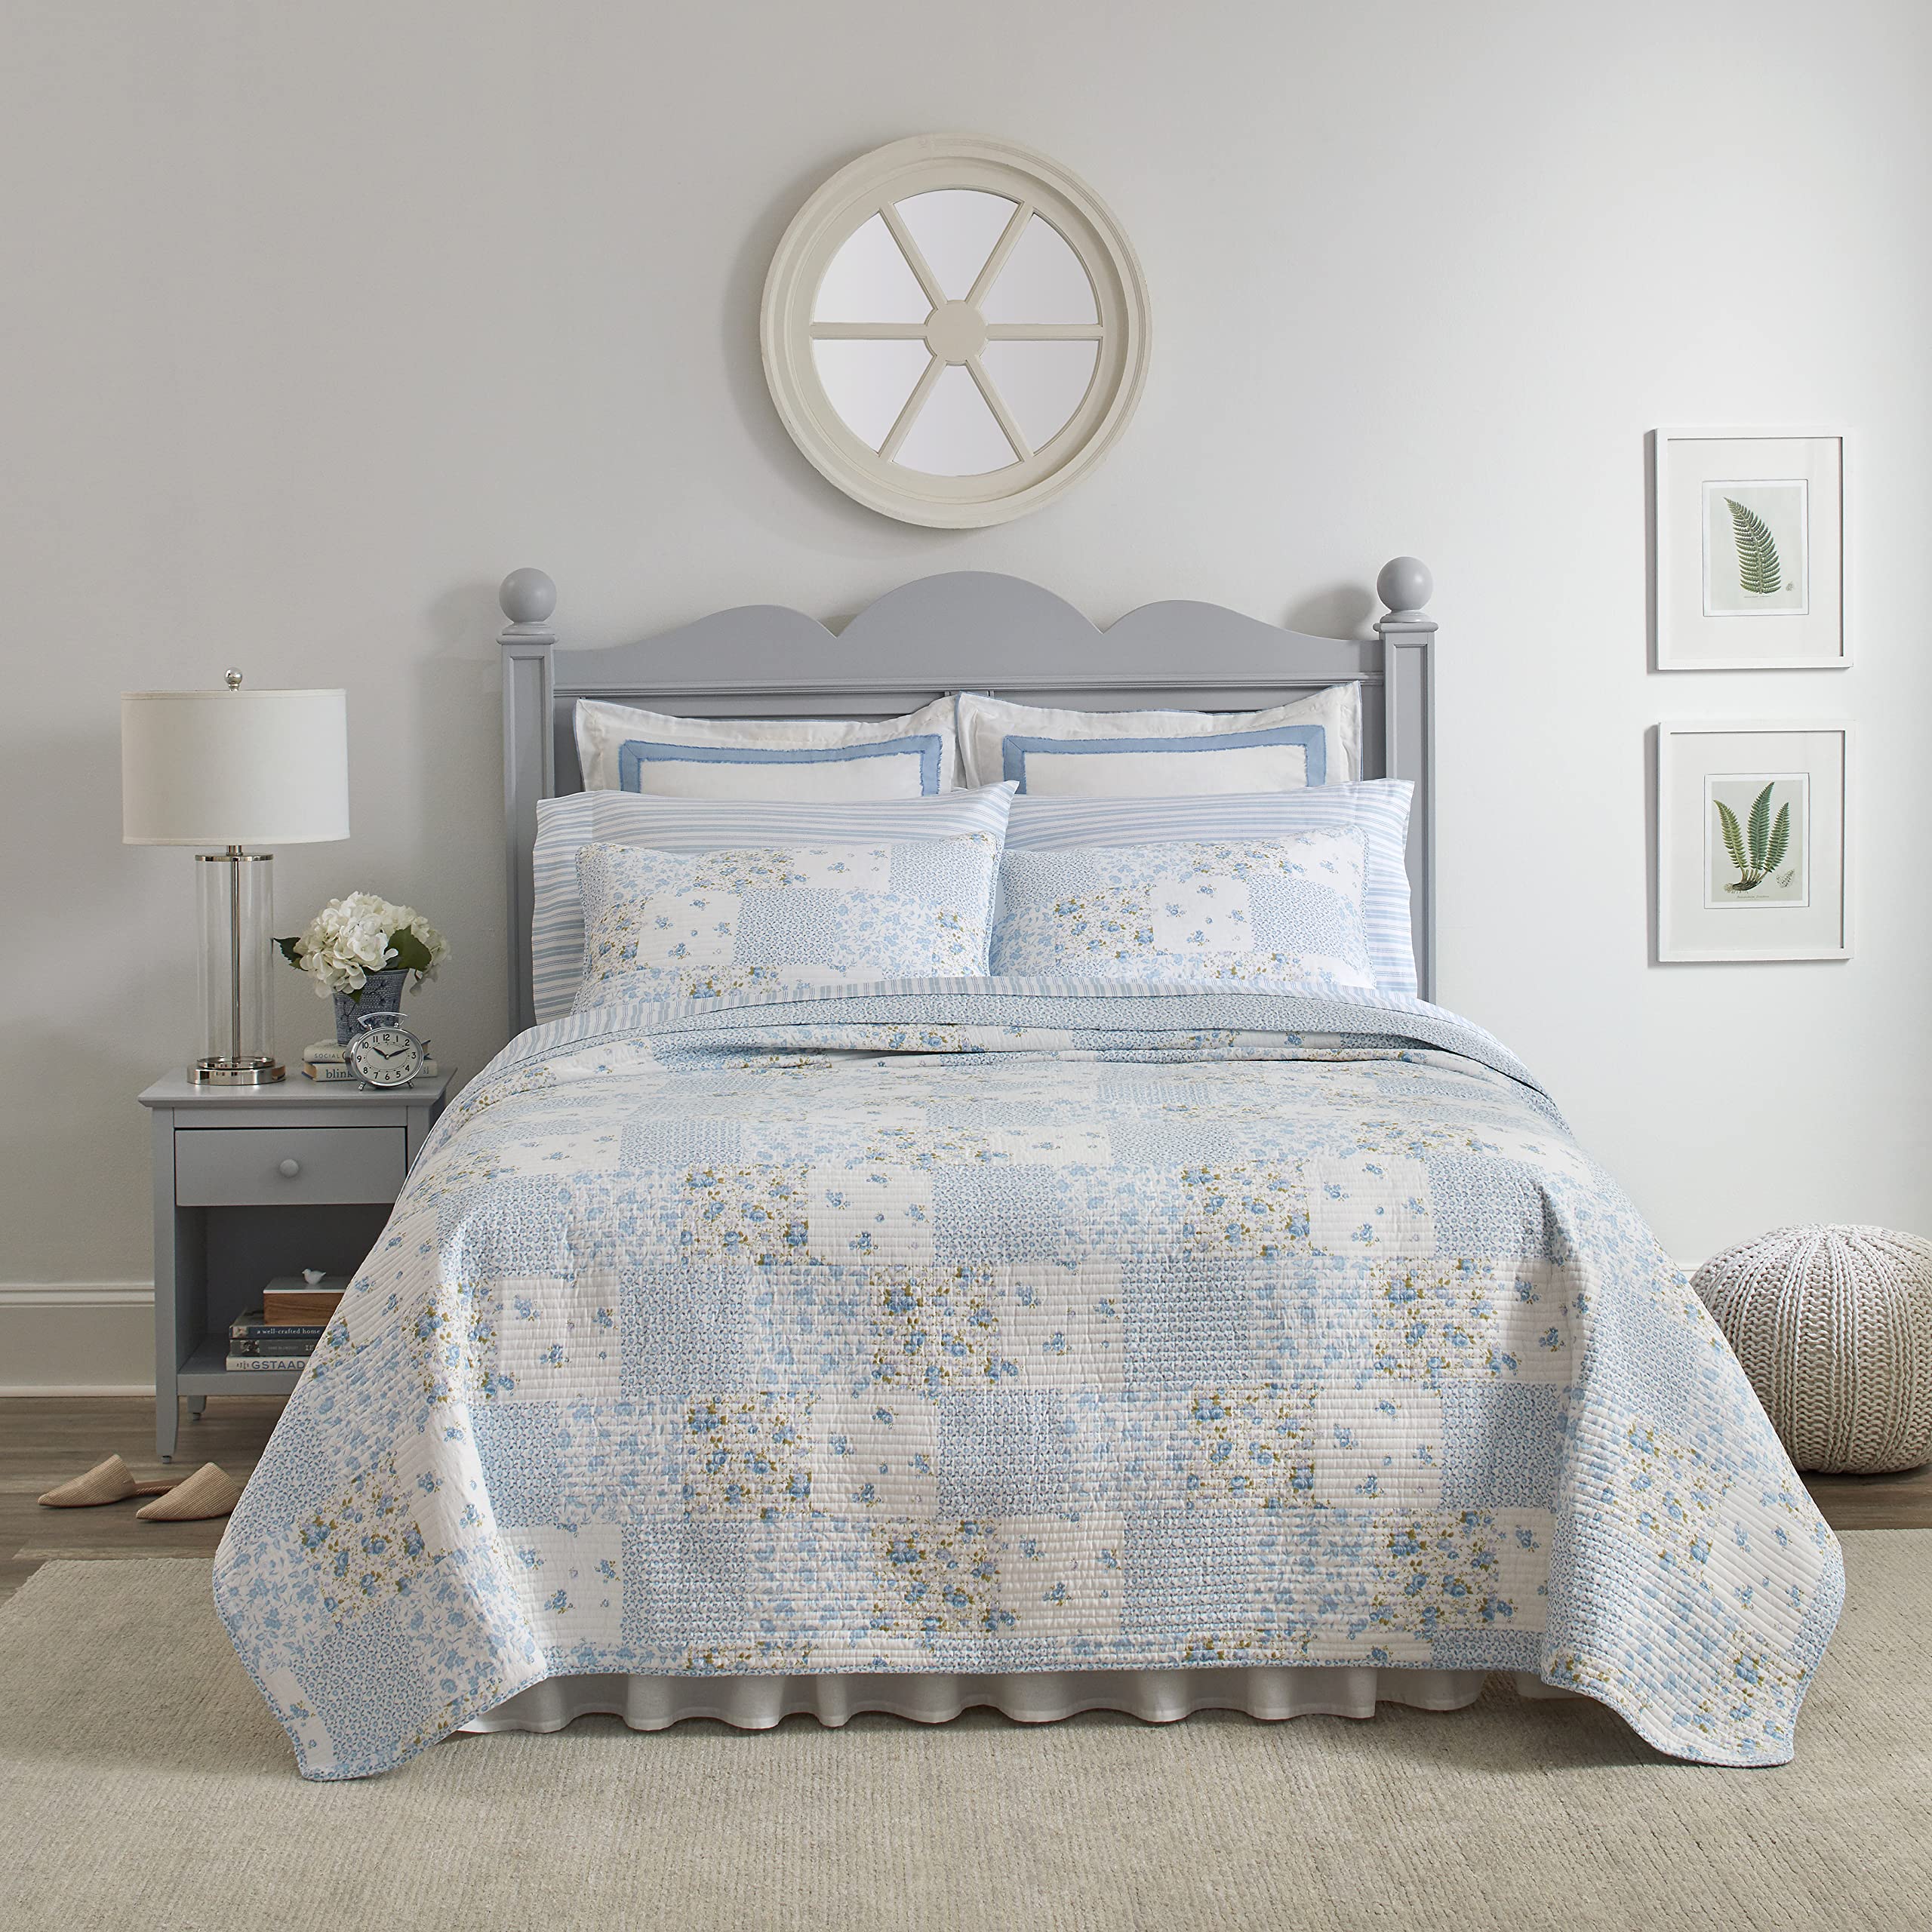 Book Cover Laura Ashley Home - Kenna Collection - Quilt Set - 100% Cotton, Reversible, Lightweight Bedding with Matching Sham(s), Pre-Washed for Added Softness, King, Cornflower, Blue